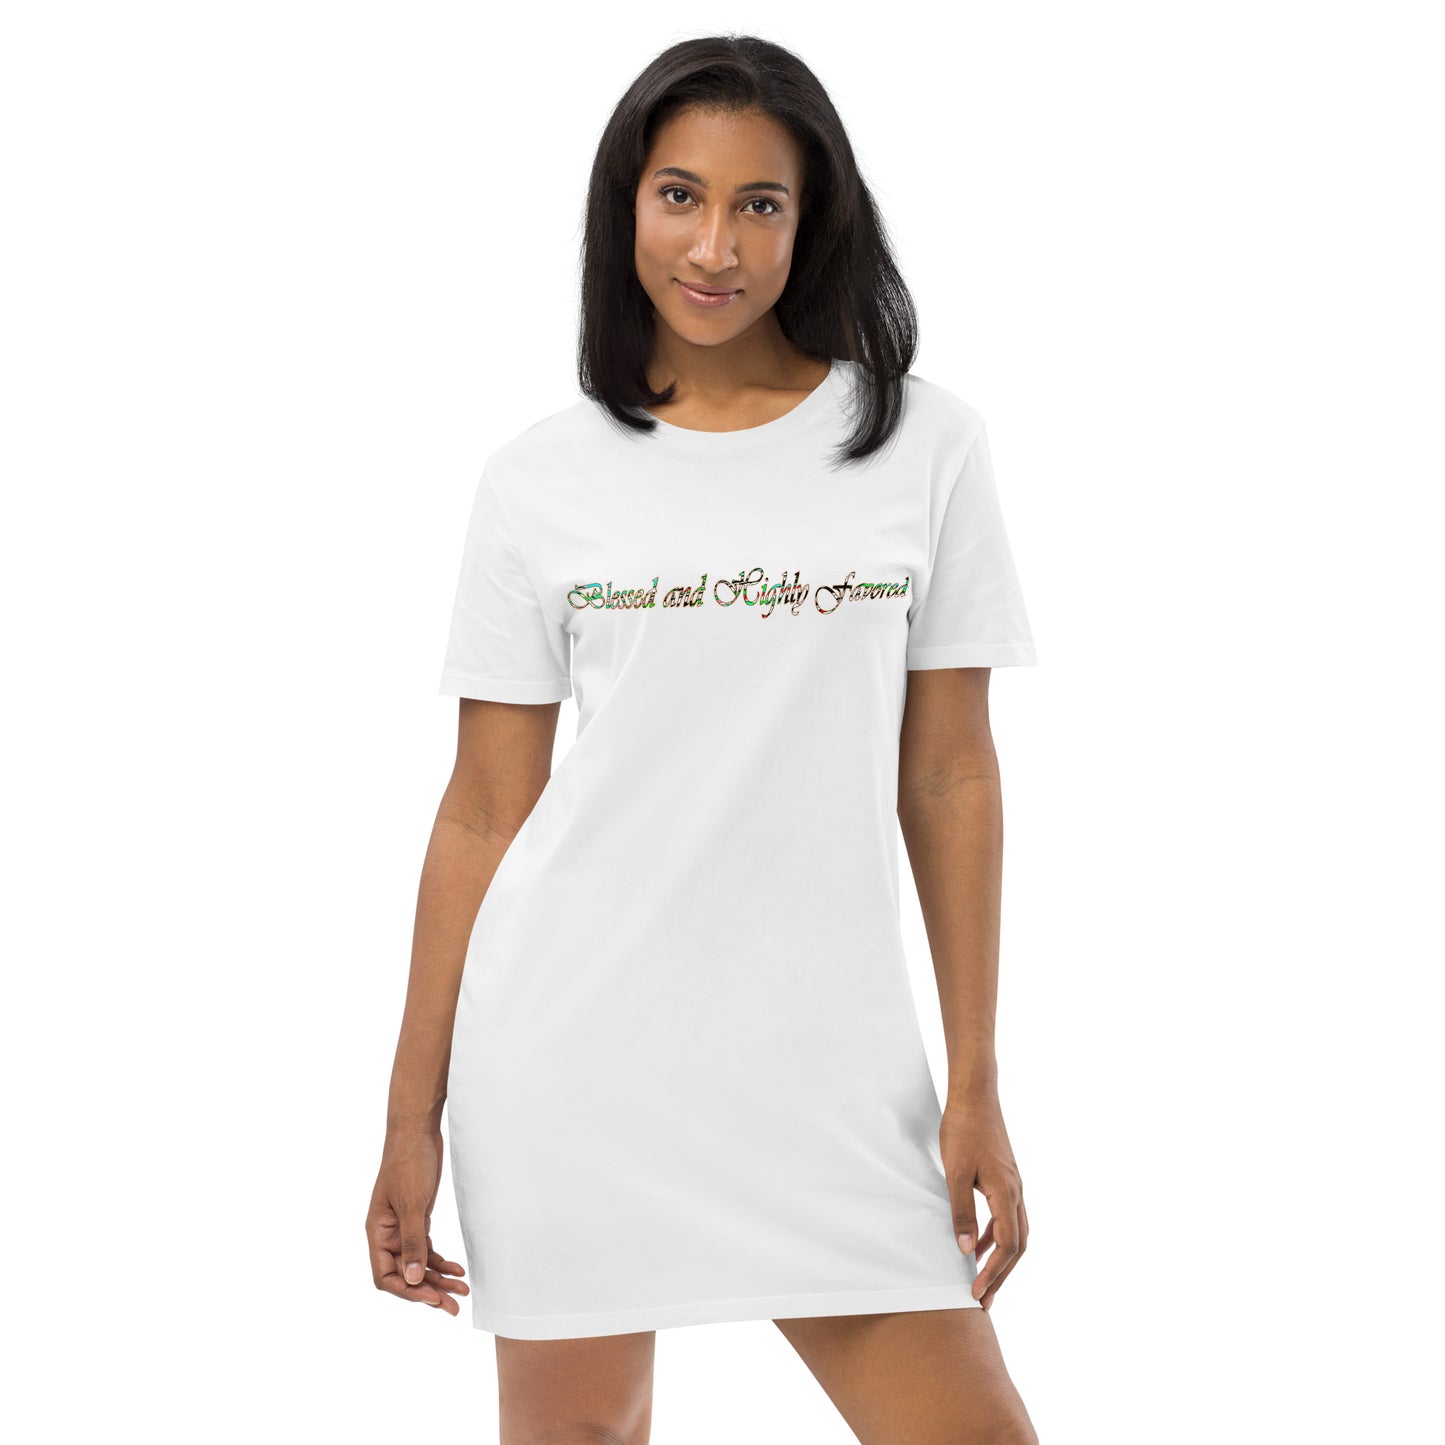 Graphic Blessed Organic cotton t-shirt dress